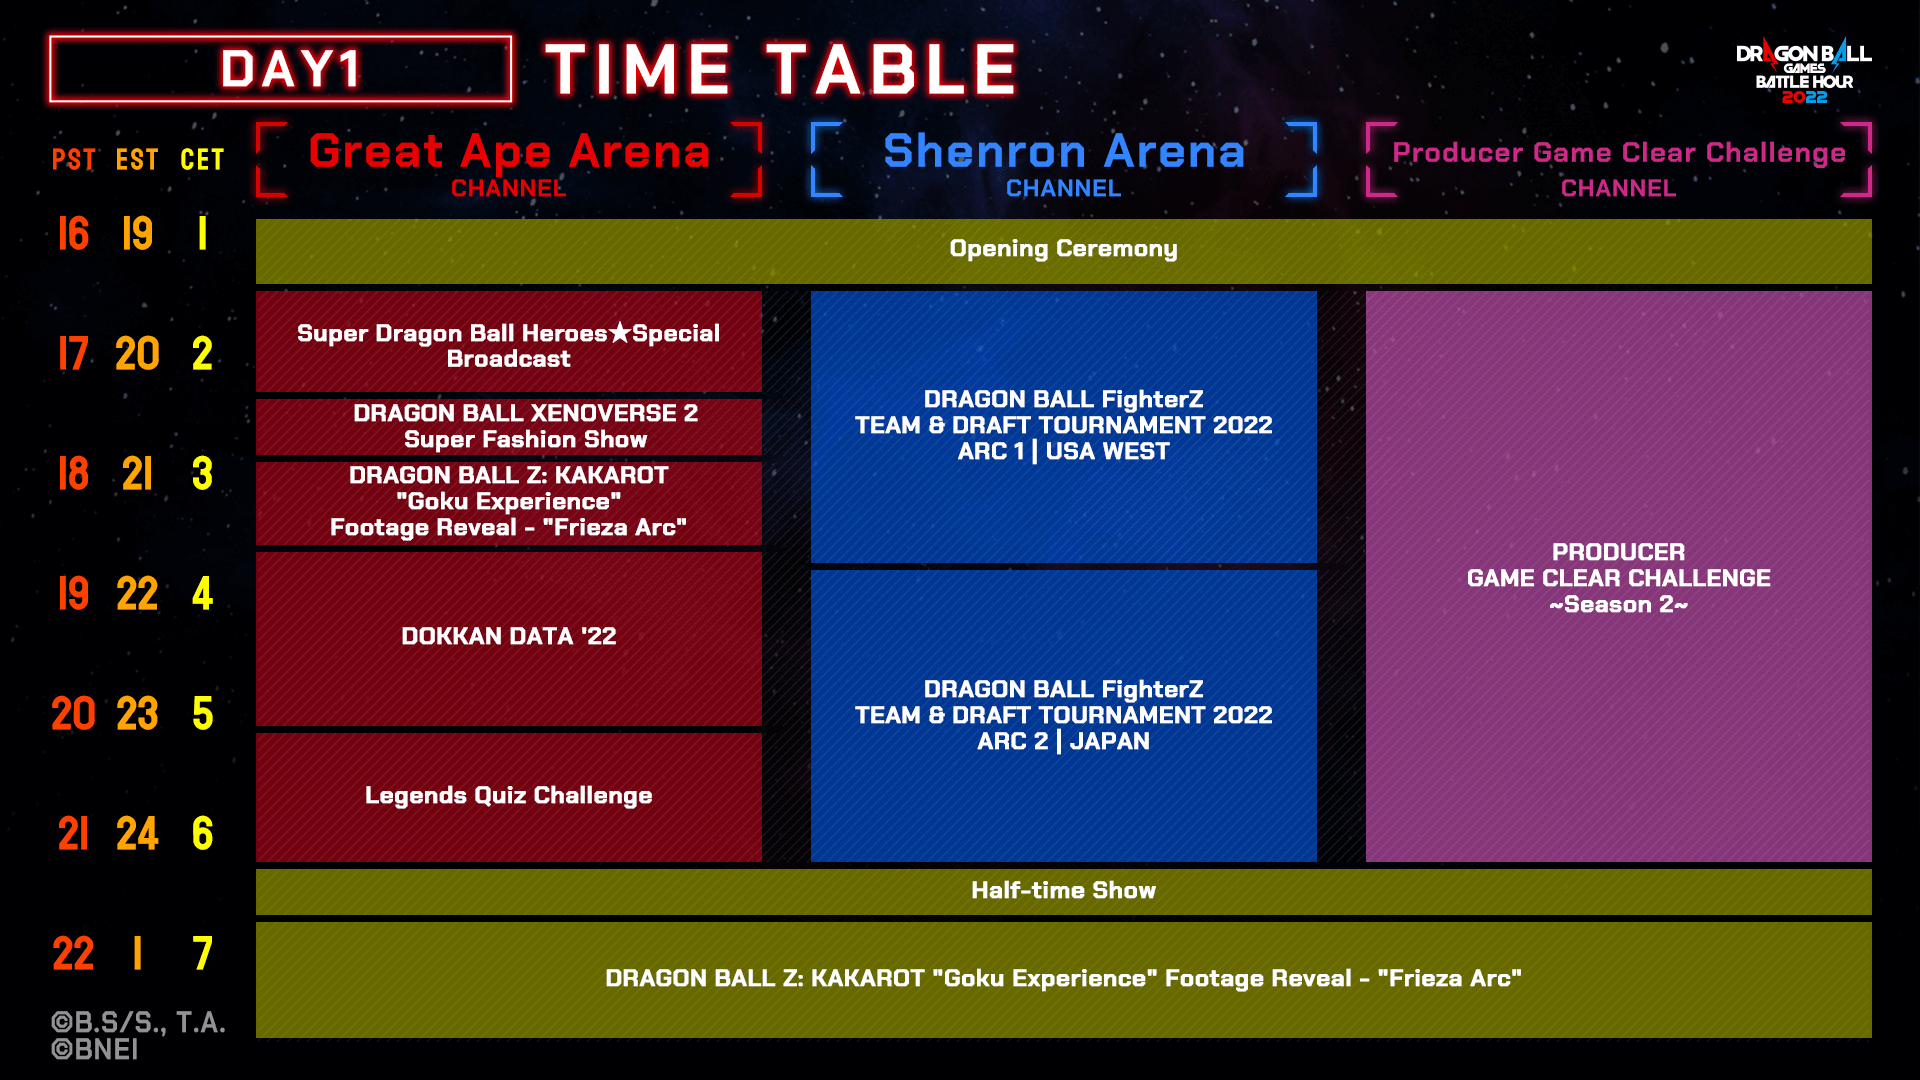 Official DRAGON BALL Games Battle Hour 2022 event schedule - Day 1